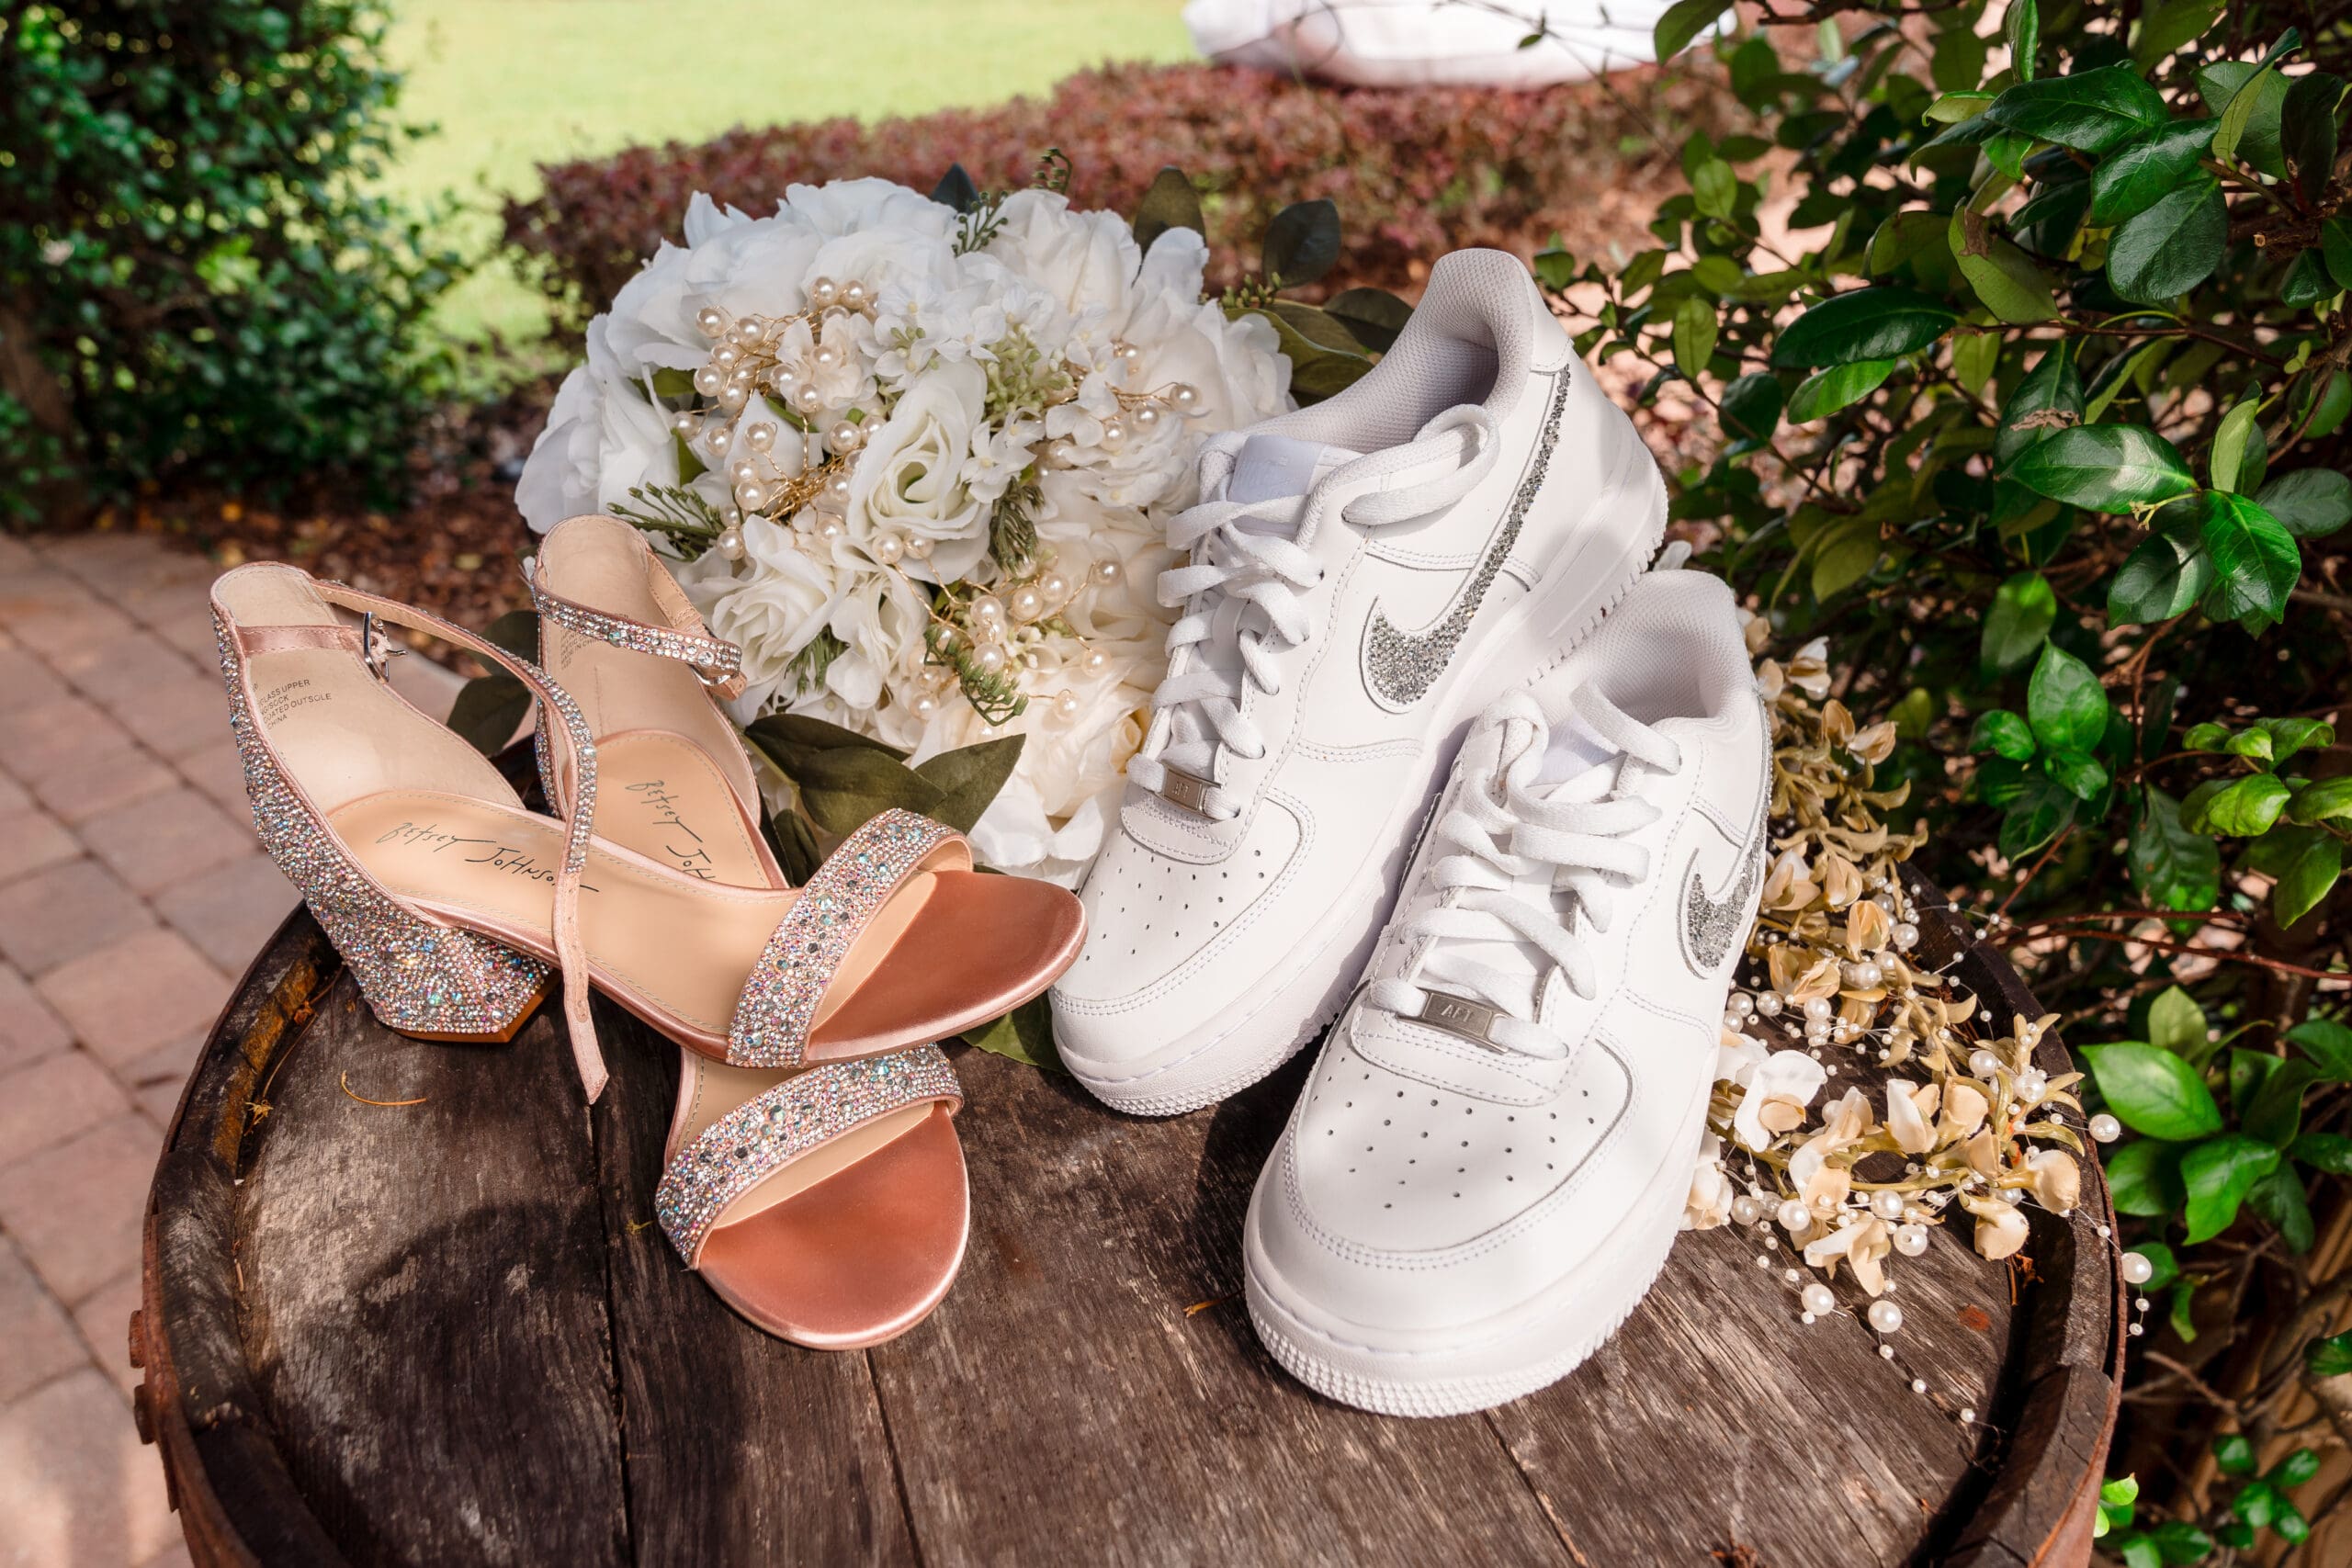 Taylor and David's Shoes and Bouquet on Barrel